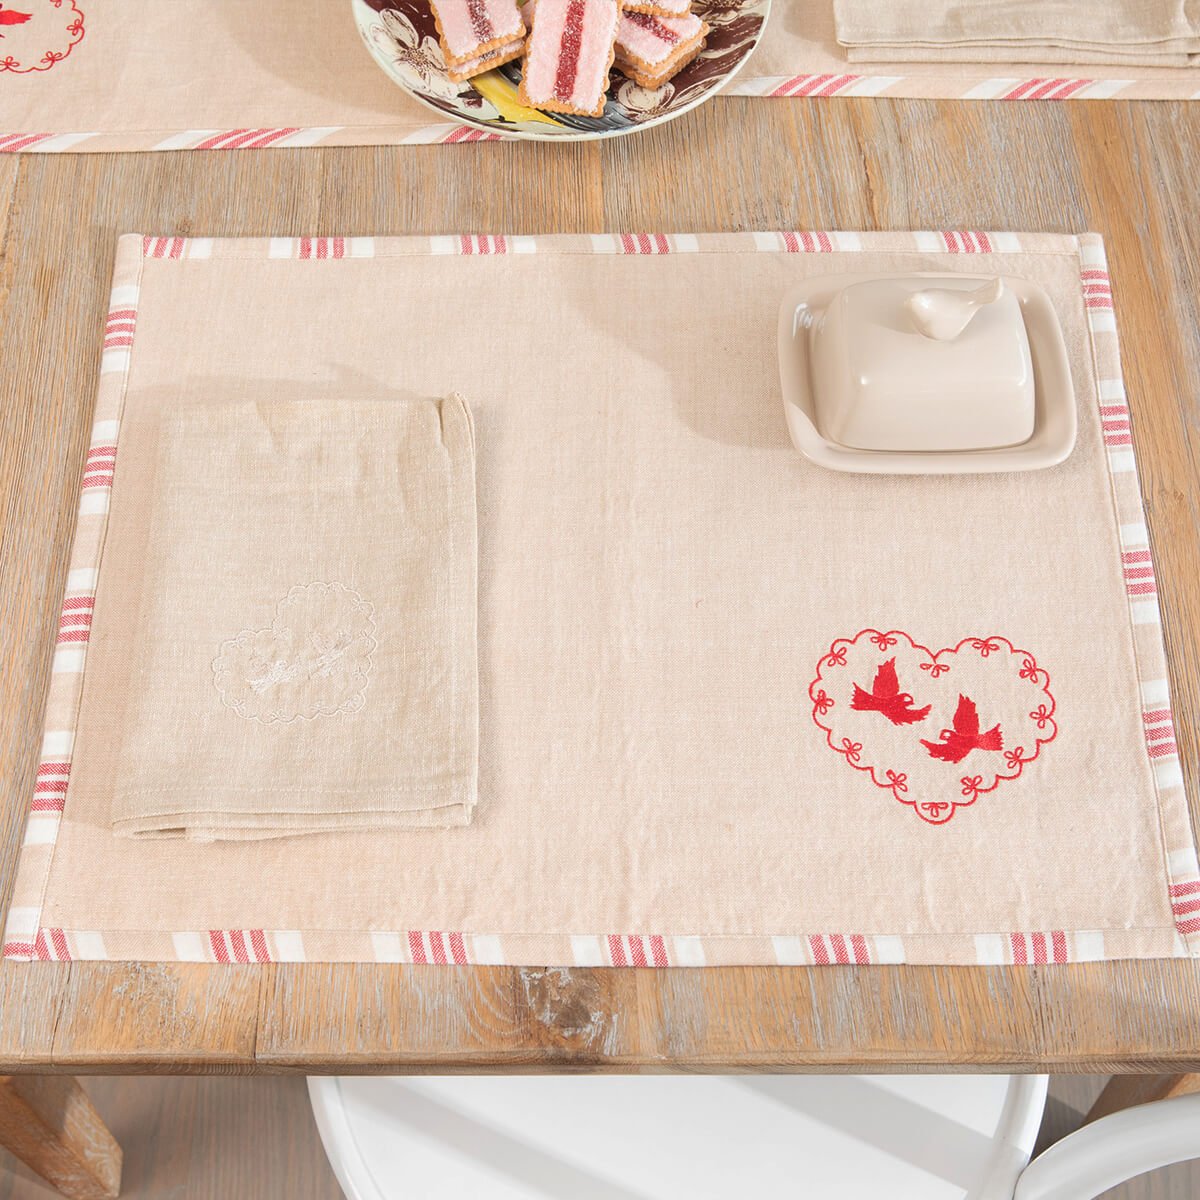 Handloom Cotton Woven Table Placemat - Set of 4 - Notbrand